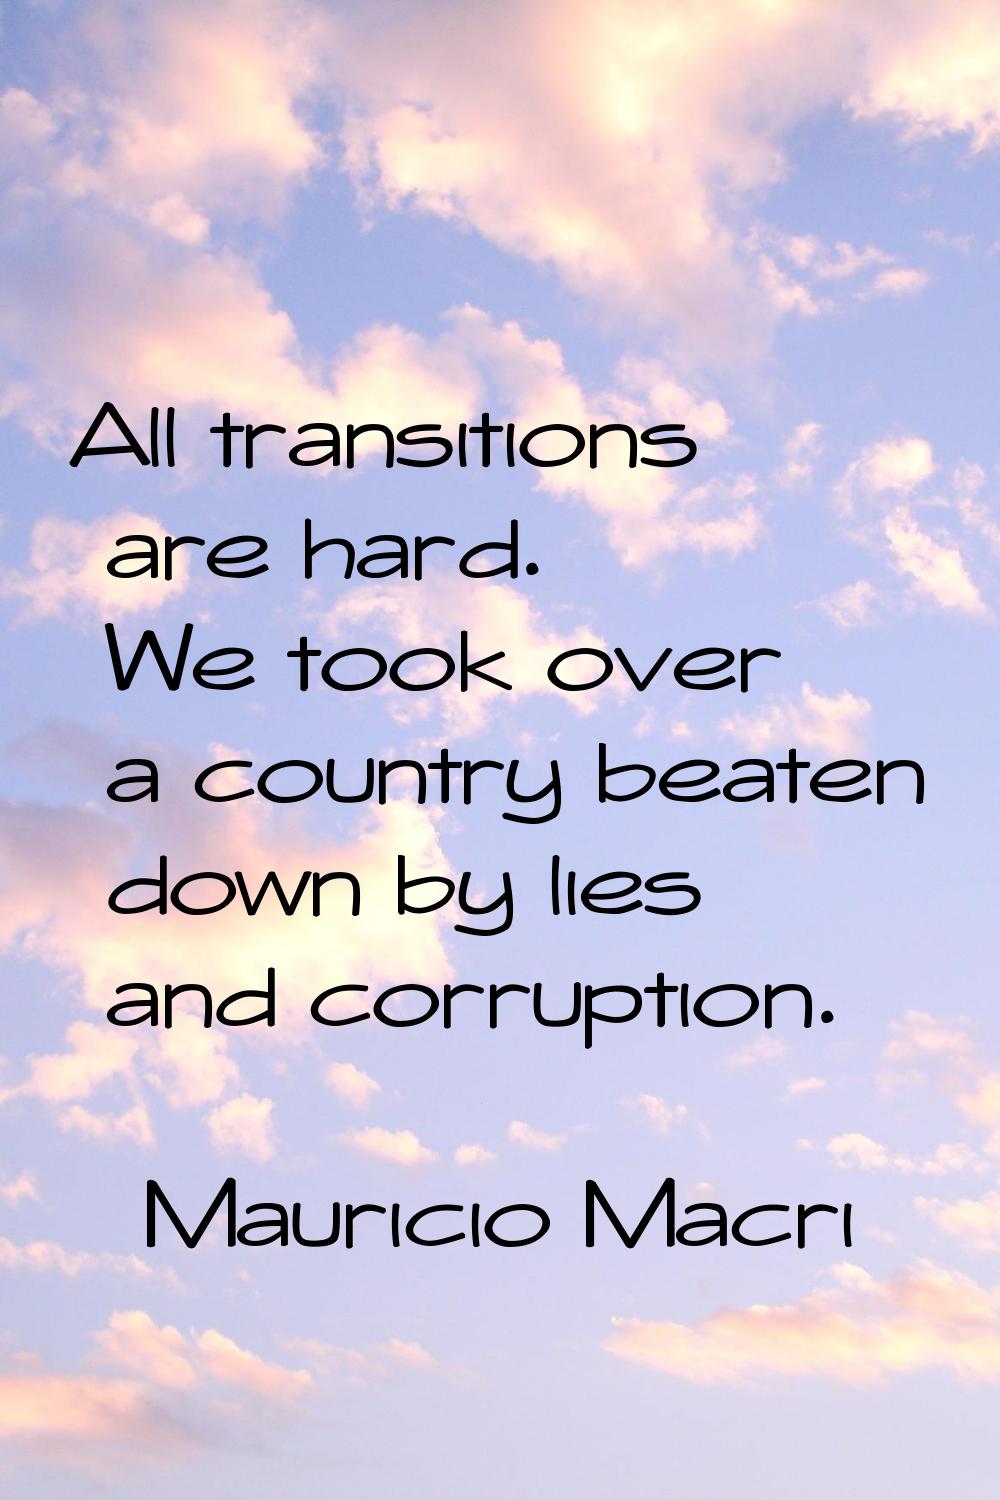 All transitions are hard. We took over a country beaten down by lies and corruption.